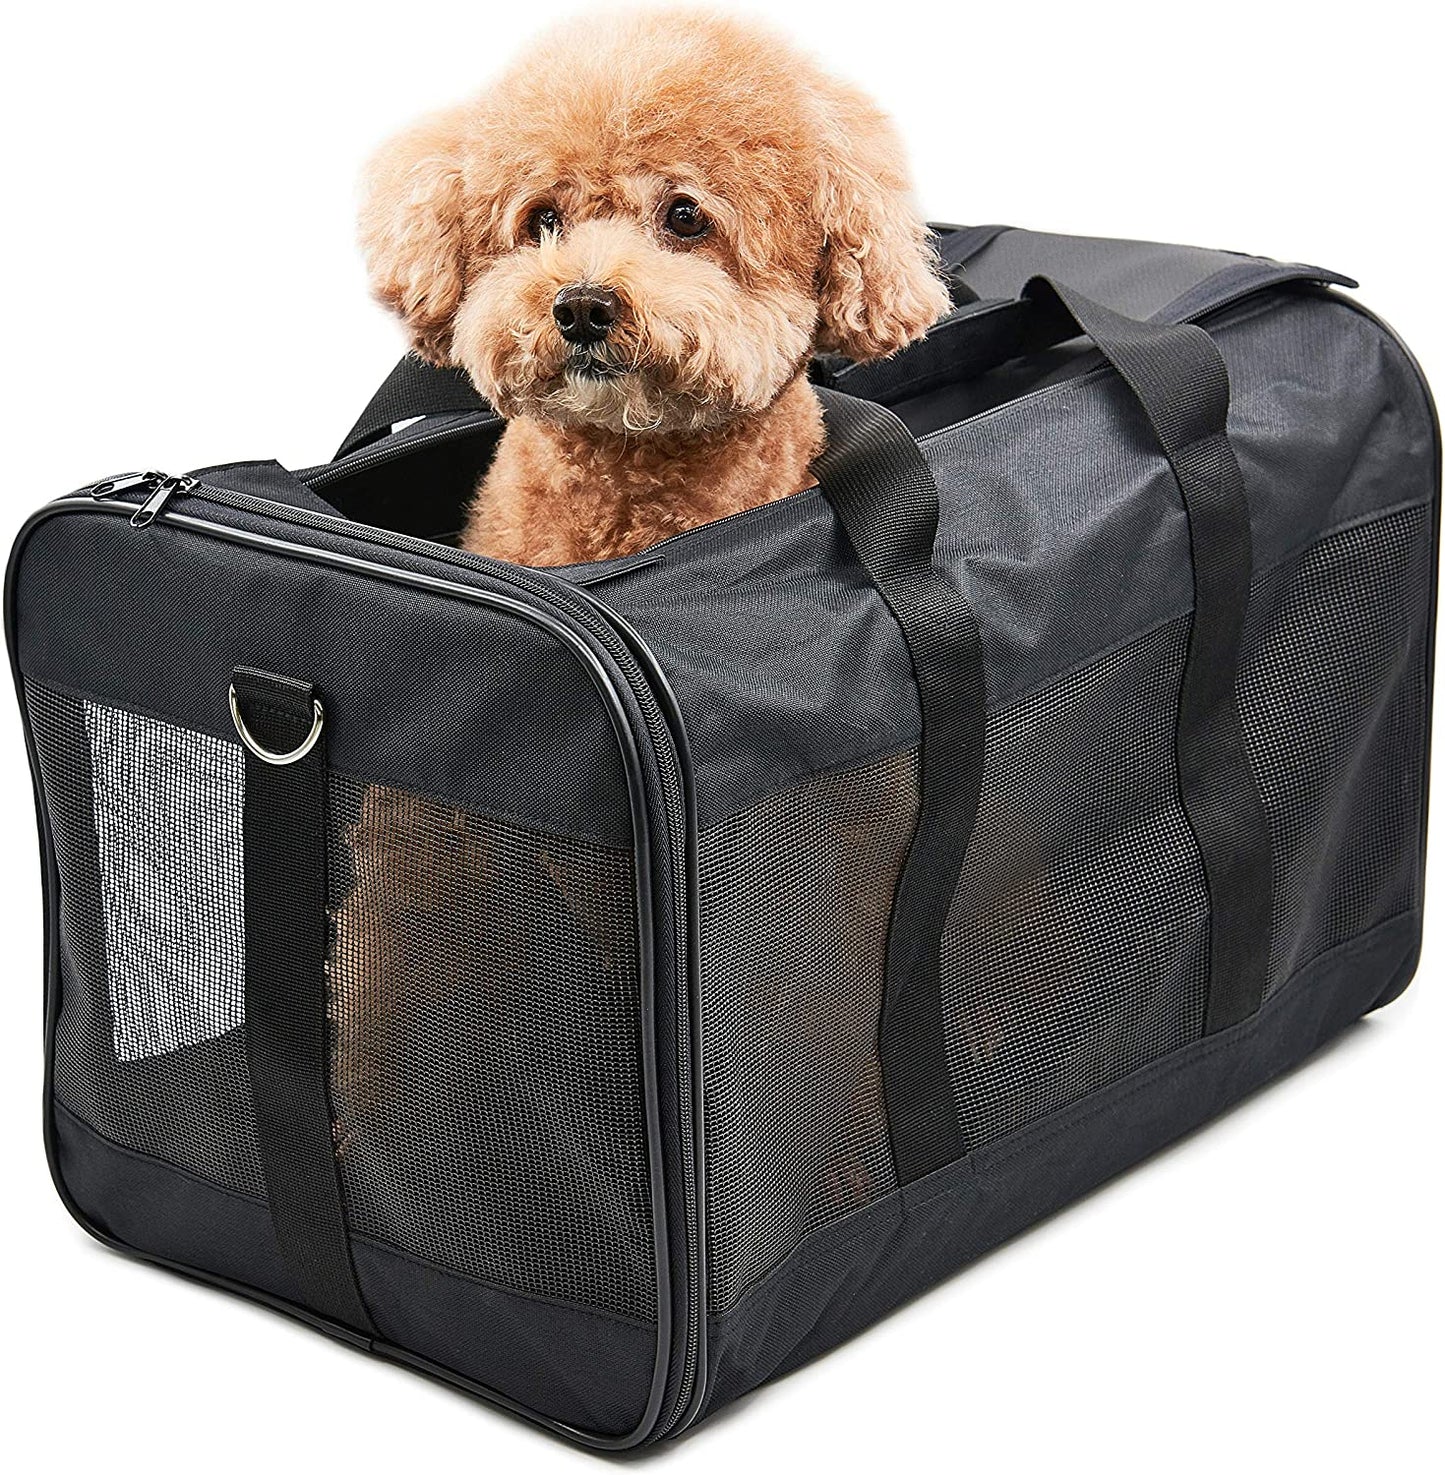 Scratchme Pet Travel Carrier Soft Sided Portable Bag for Cats and Small Dogs, Collapsible, Durable, Airline Approved, Travel Friendly, Carry Your Pet with Safely and Comfortably, Black Large